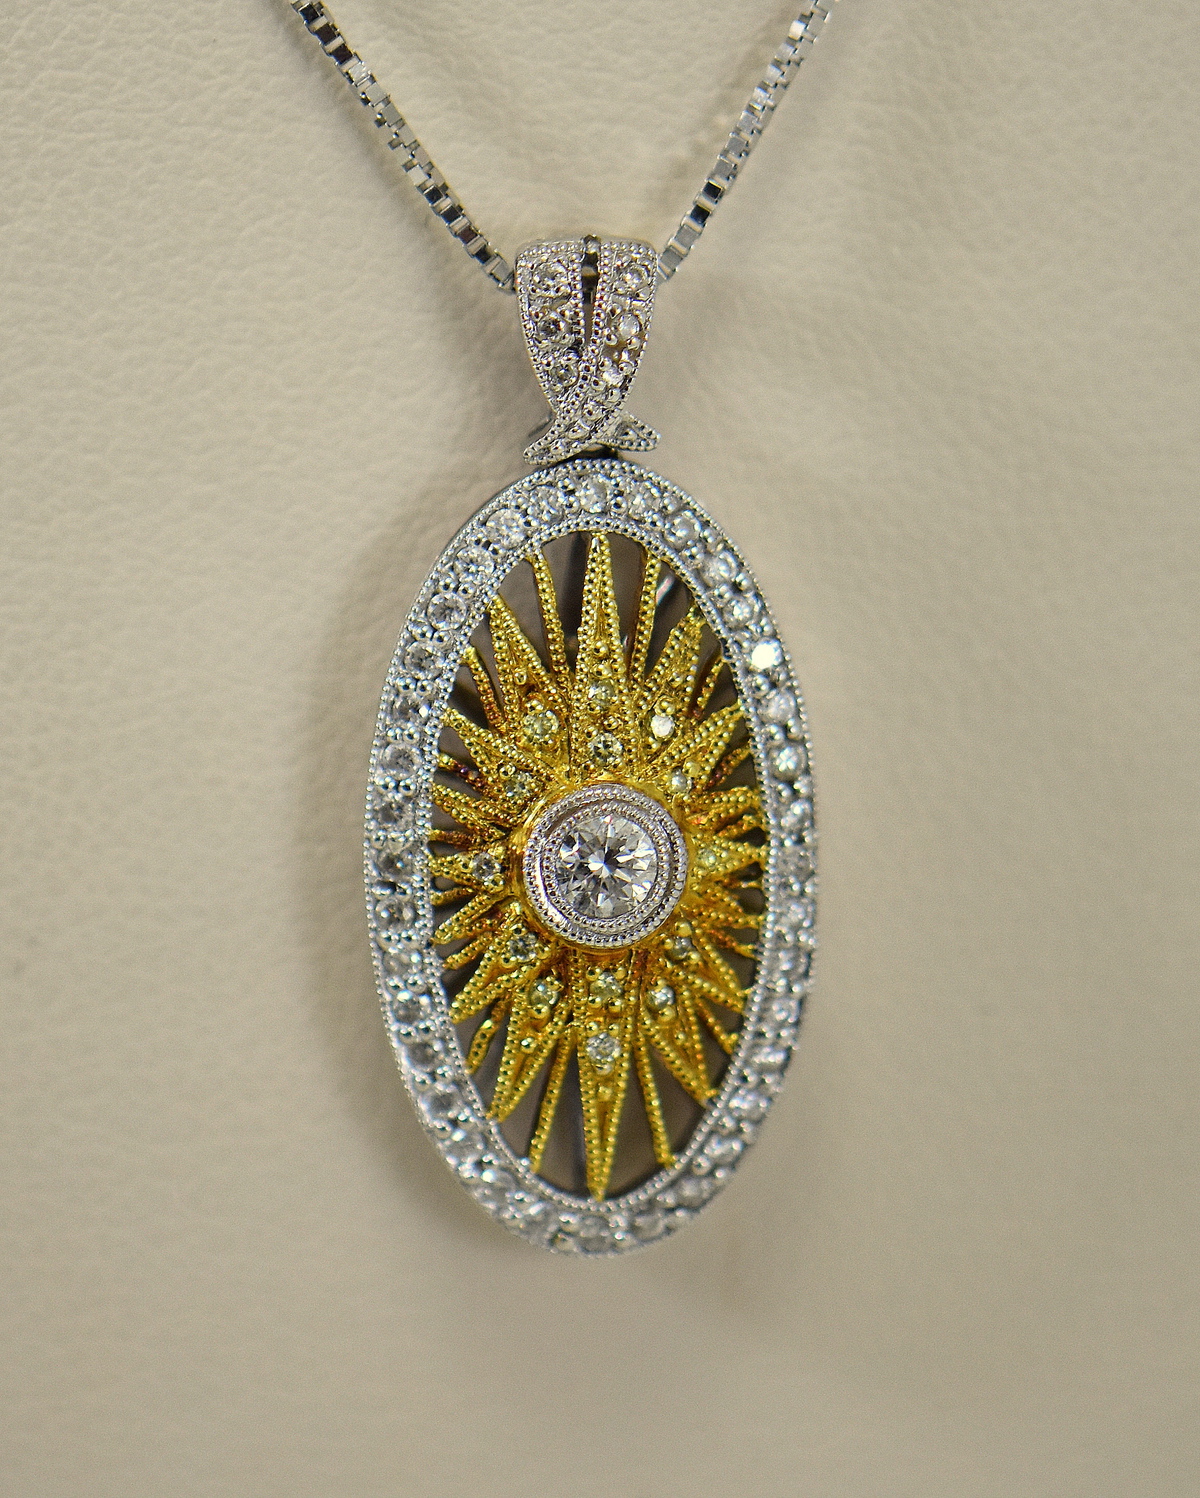 18k Starburst Pendant with White & Yellow Diamonds | Exquisite Jewelry for  Every Occasion | FWCJ